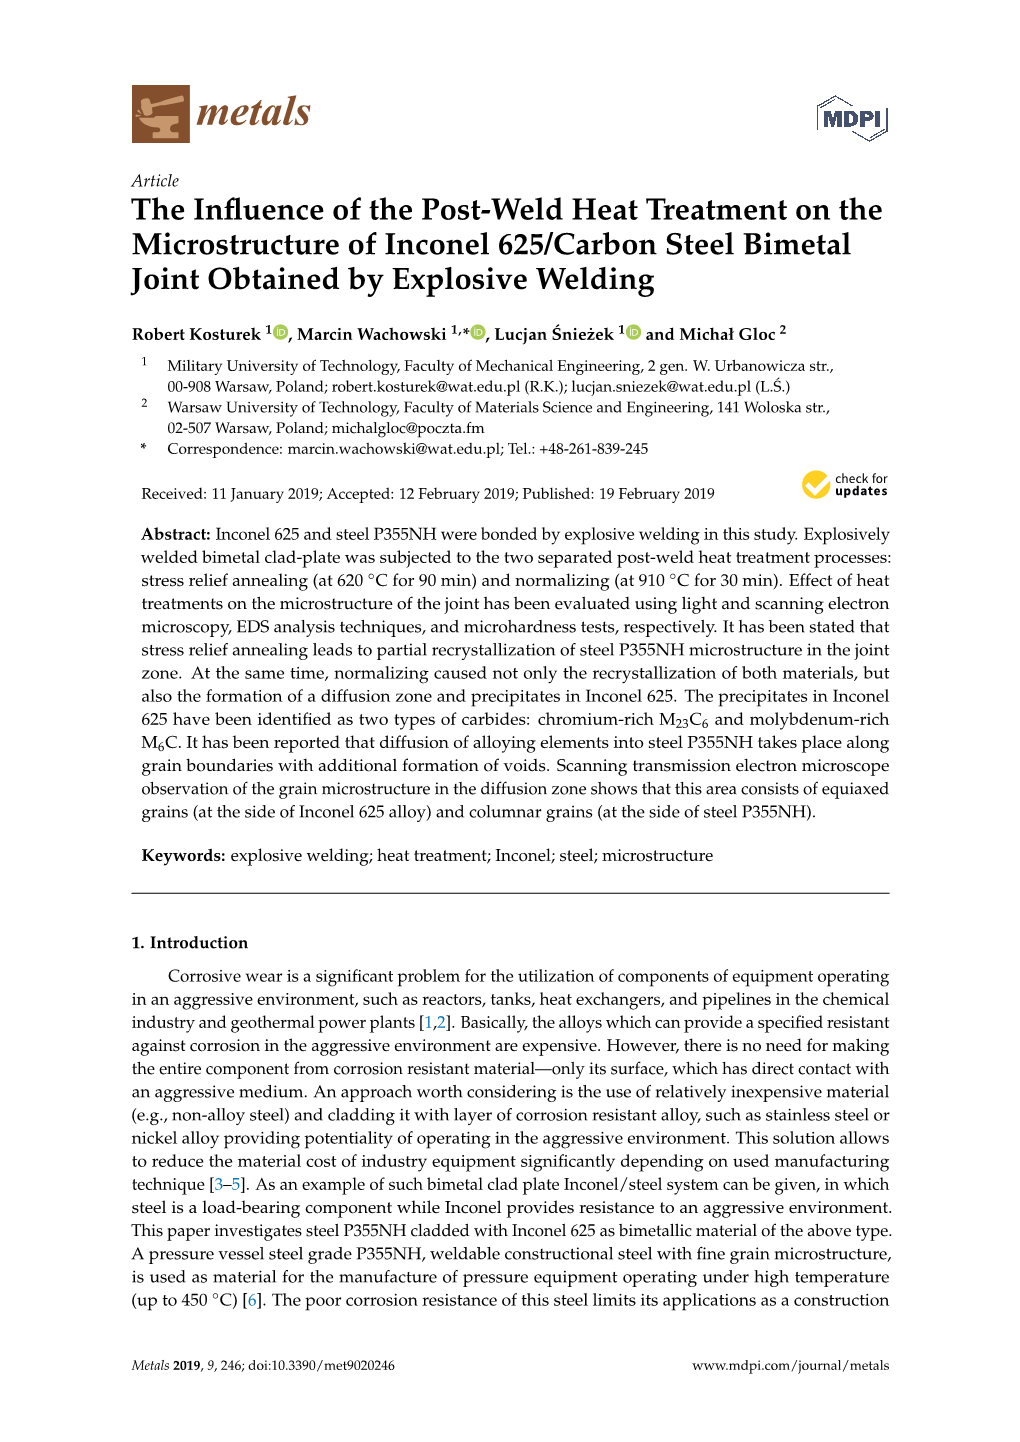 The Influence of the Post-Weld Heat Treatment on the Microstructure of Inconel 625/Carbon Steel Bimetal Joint Obtained by Explos